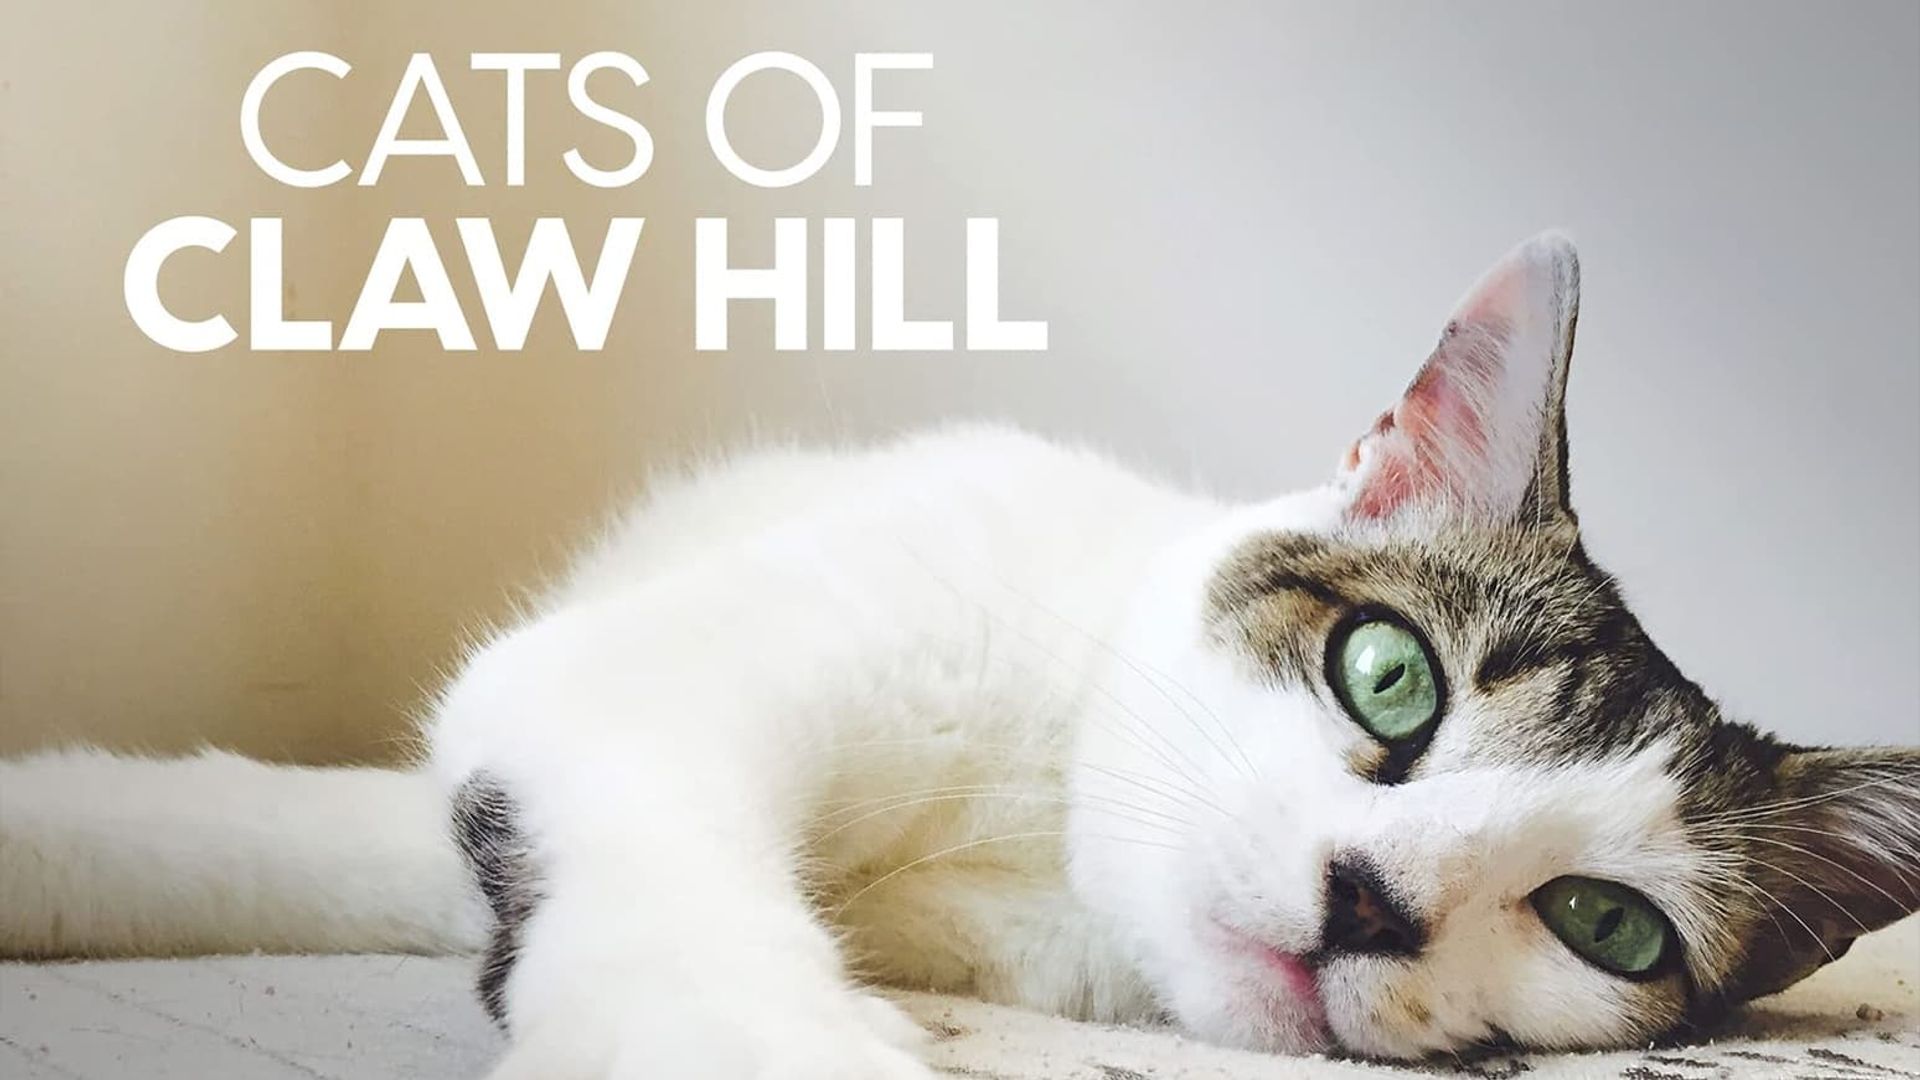 Cats of Claw Hill background